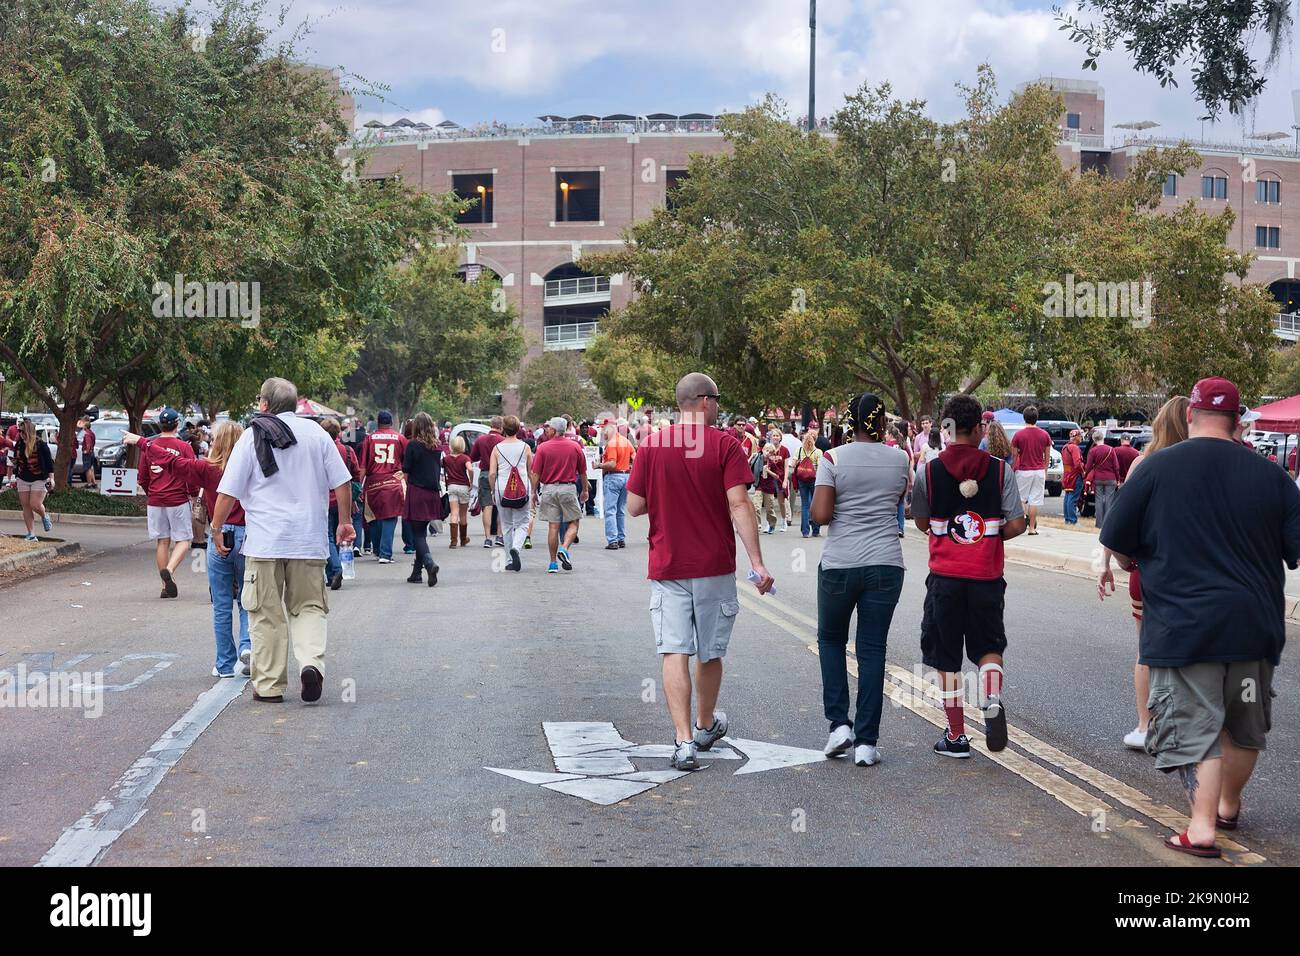 Tallahassee, Florida - November 16, 2013: Fans walking towards Doak Campbell Stadium to watch a Florida State University football game with the FSU Se Stock Photo